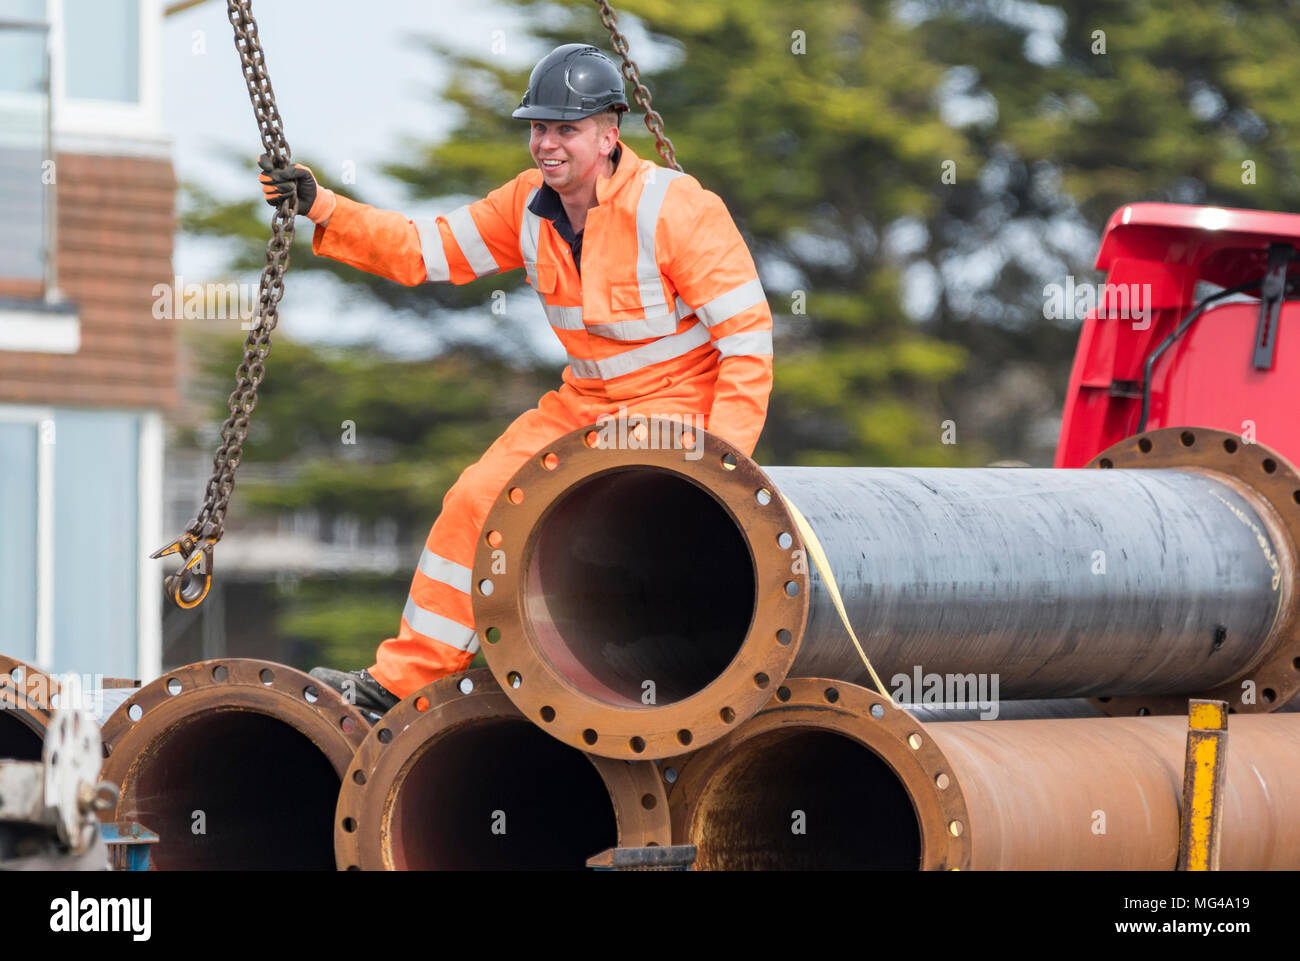 Male construction worker smiling and looking happy to be at work in the UK. Stock Photo